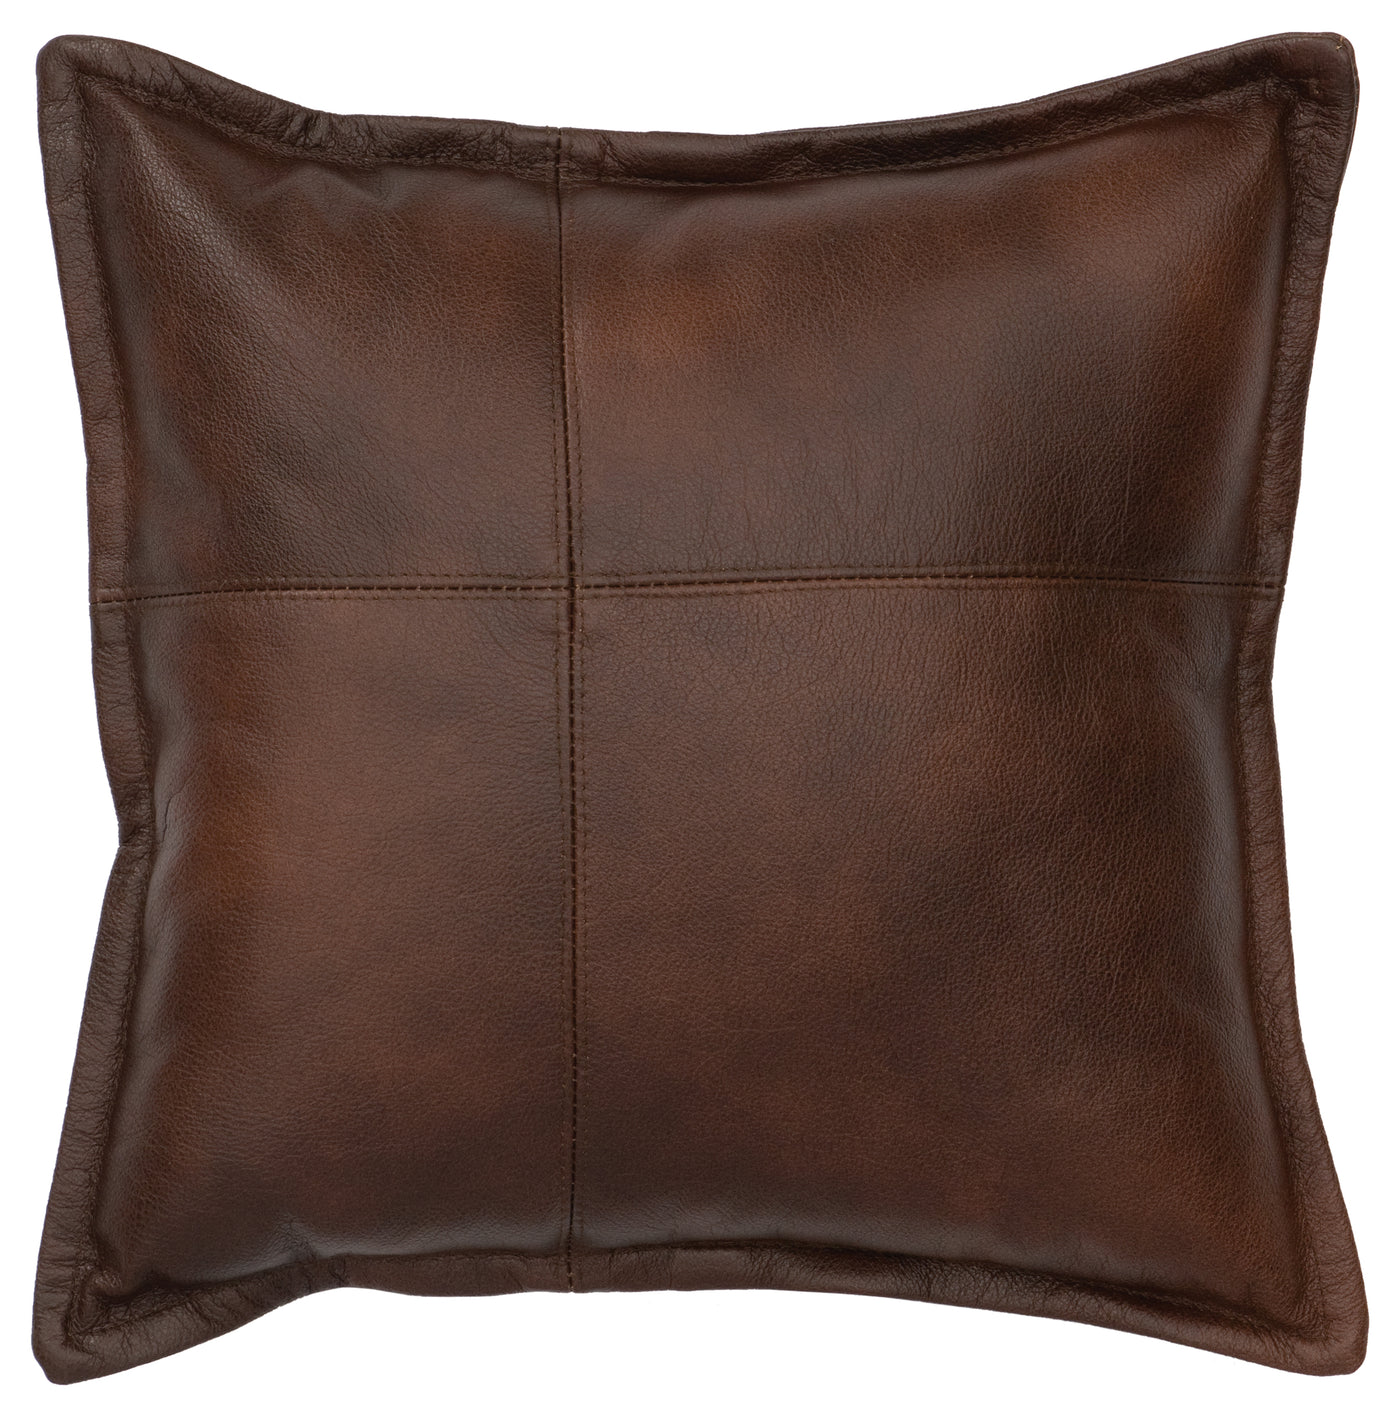 Canvello Mushroom Leather Panel Pillow - Fabric Back - 16" x 16"